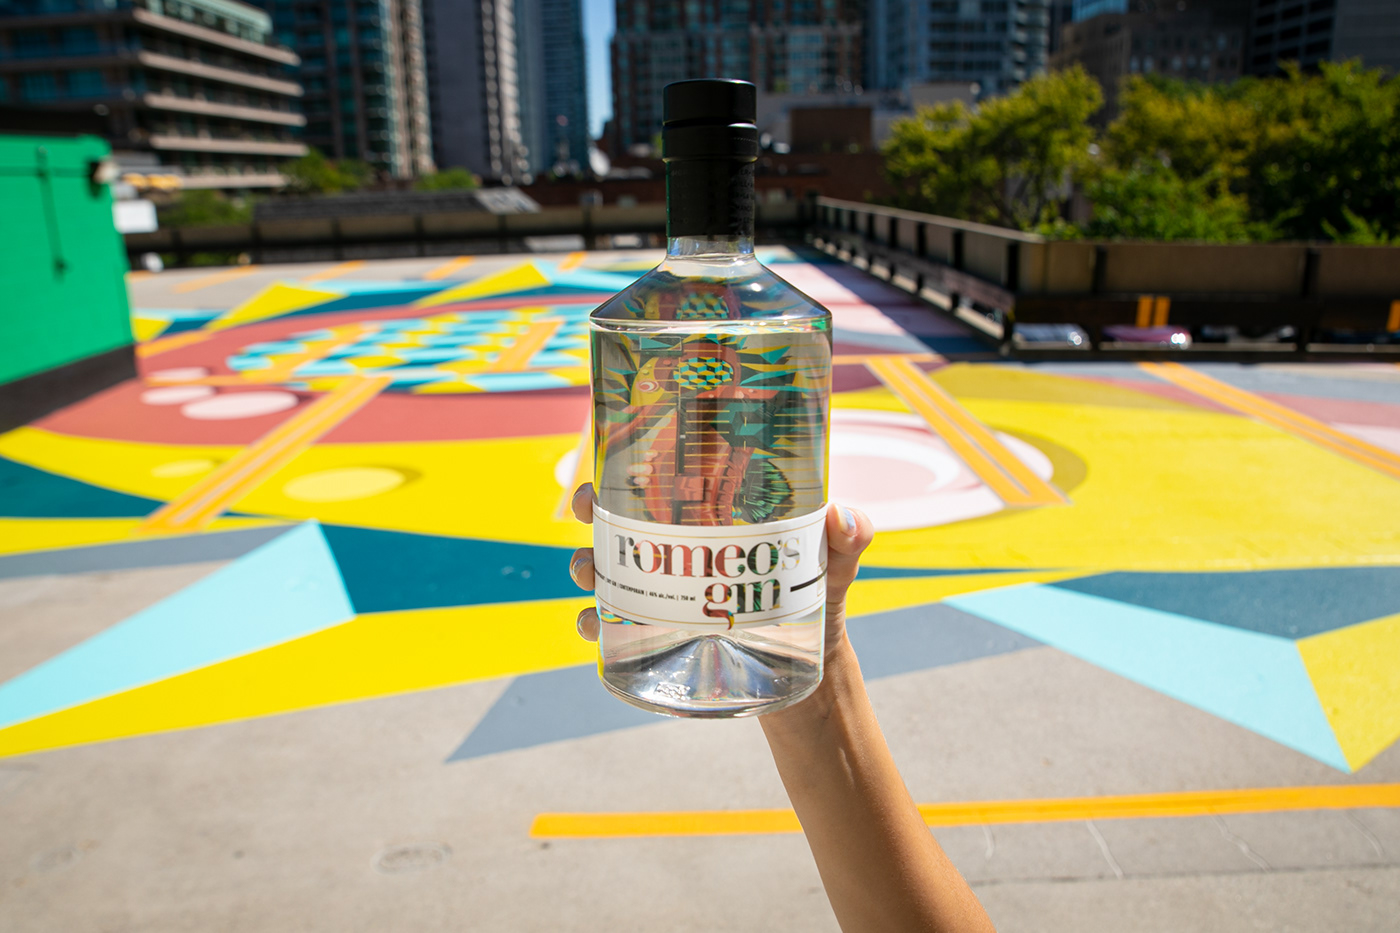 ART WHERE YOU DON'T EXPECT IT
TORONTO'S LARGEST UNEXPECTED MURAL
romeo' gin x birdO